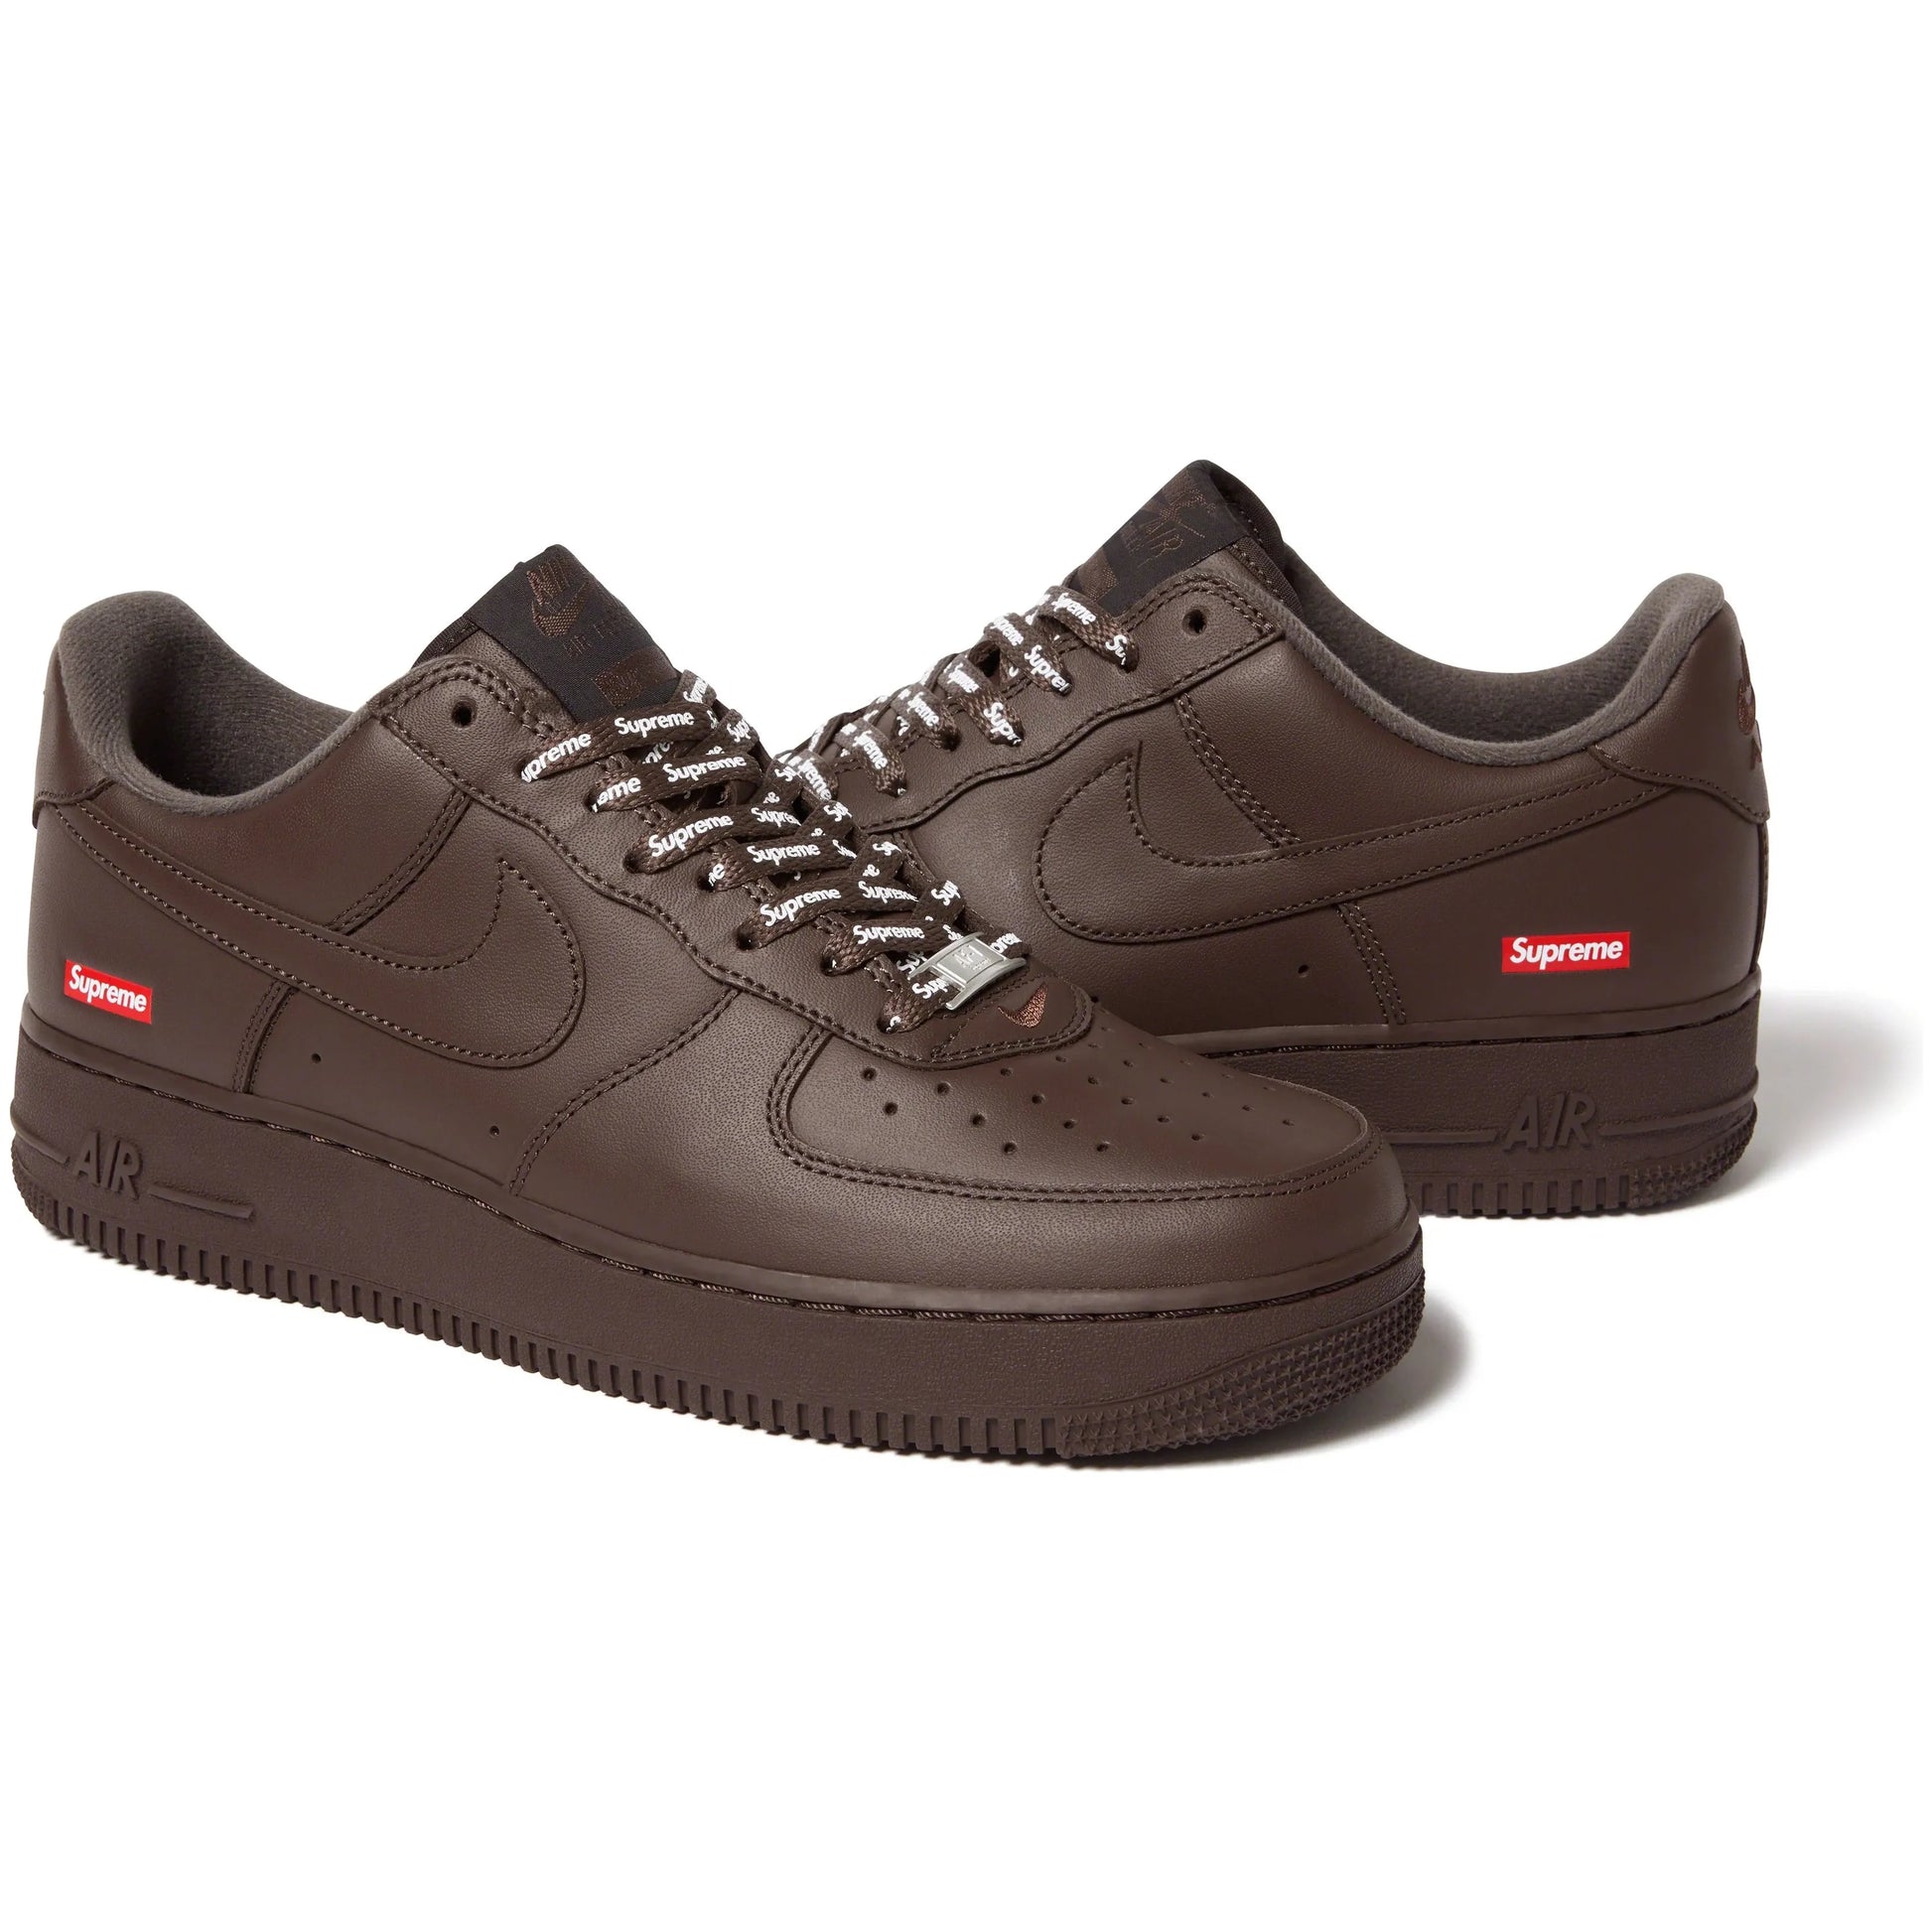 Nike Air Force 1 Low Supreme Baroque Brown from Nike